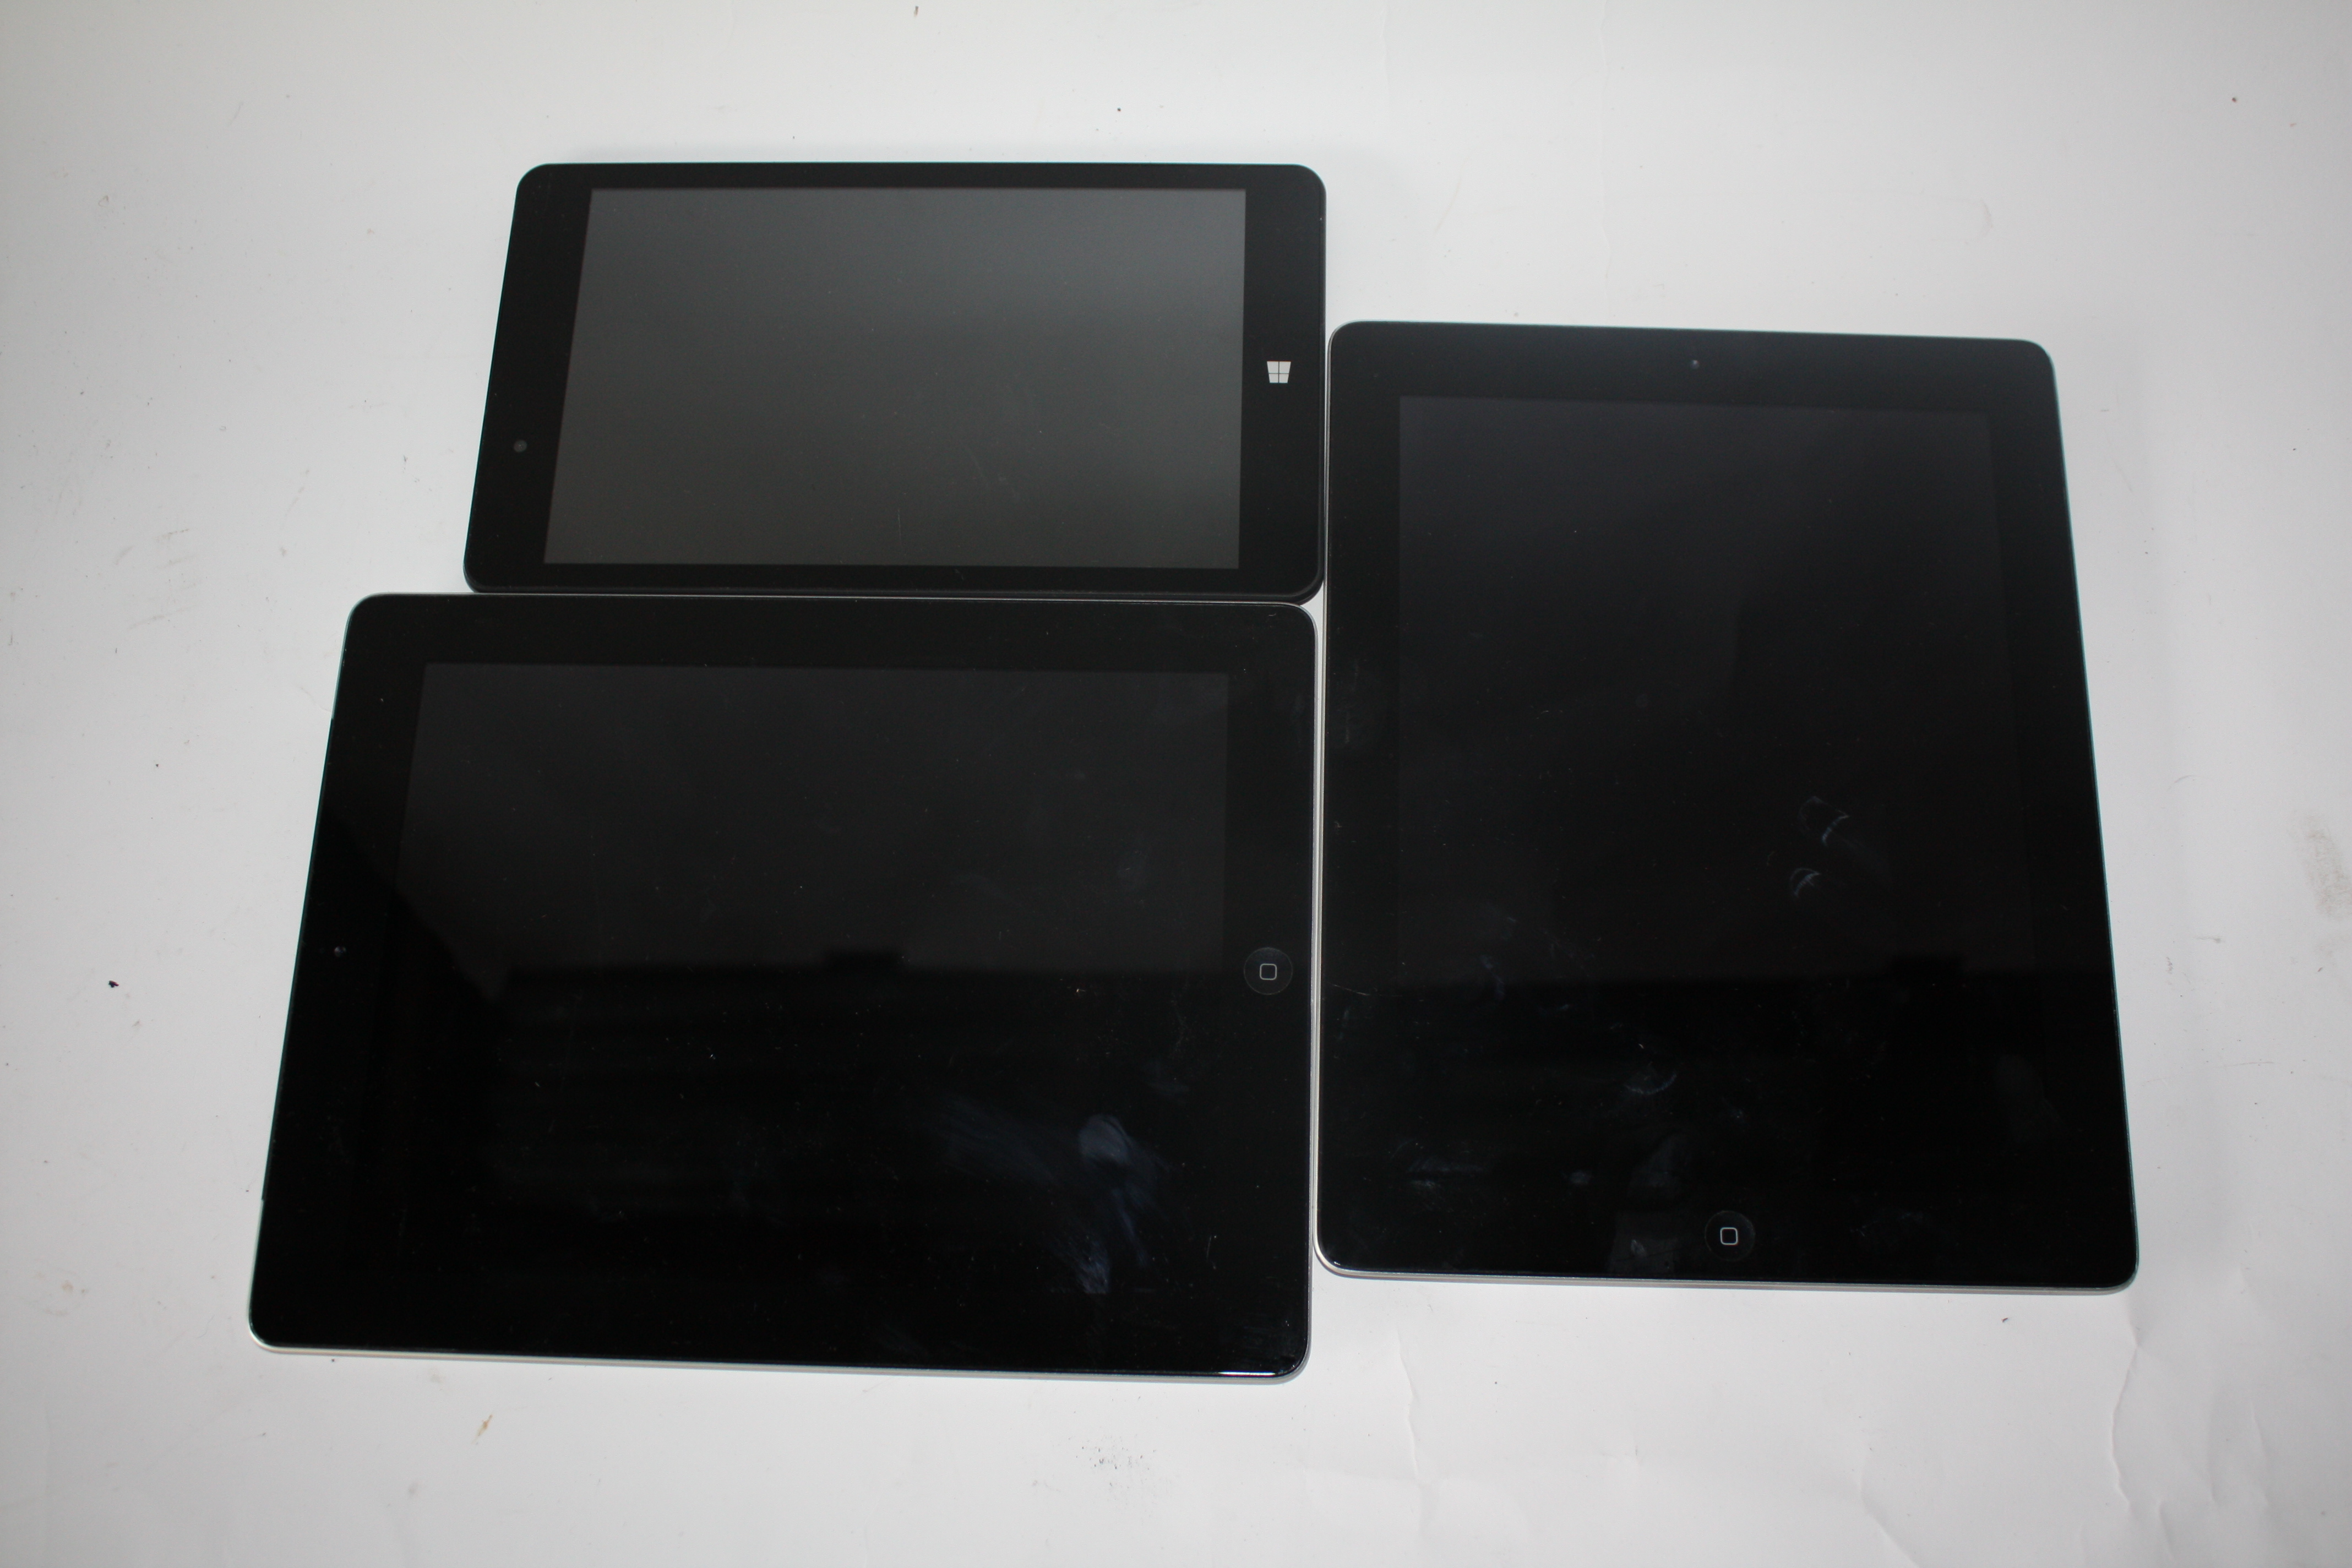 Pair of i-pads together with Lynx tablets